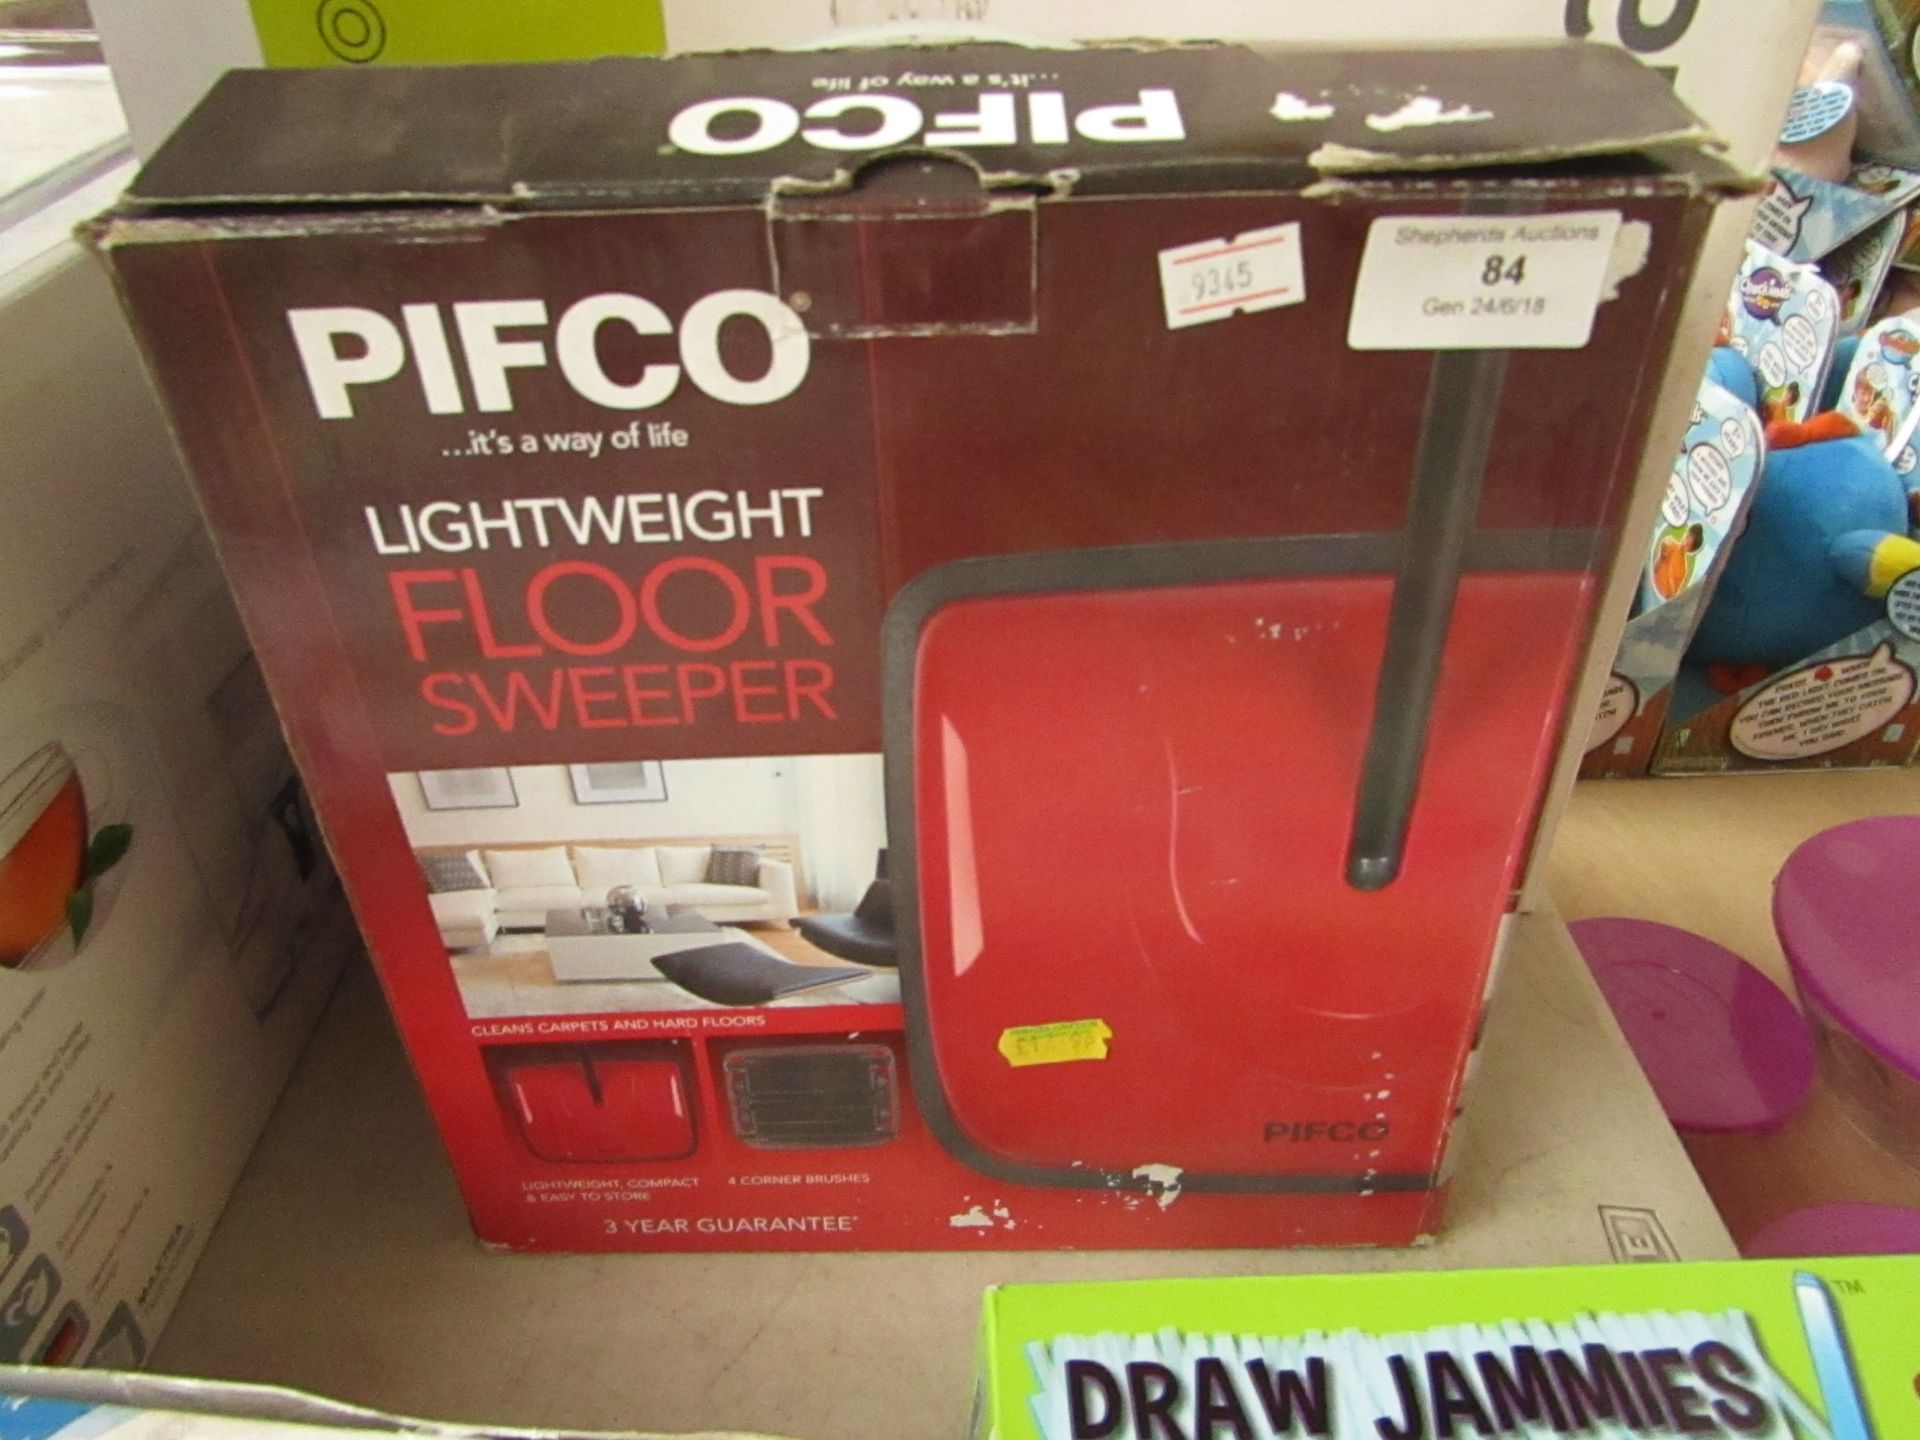 Pifco lightweight floor sweeper, unchecked and boxed.